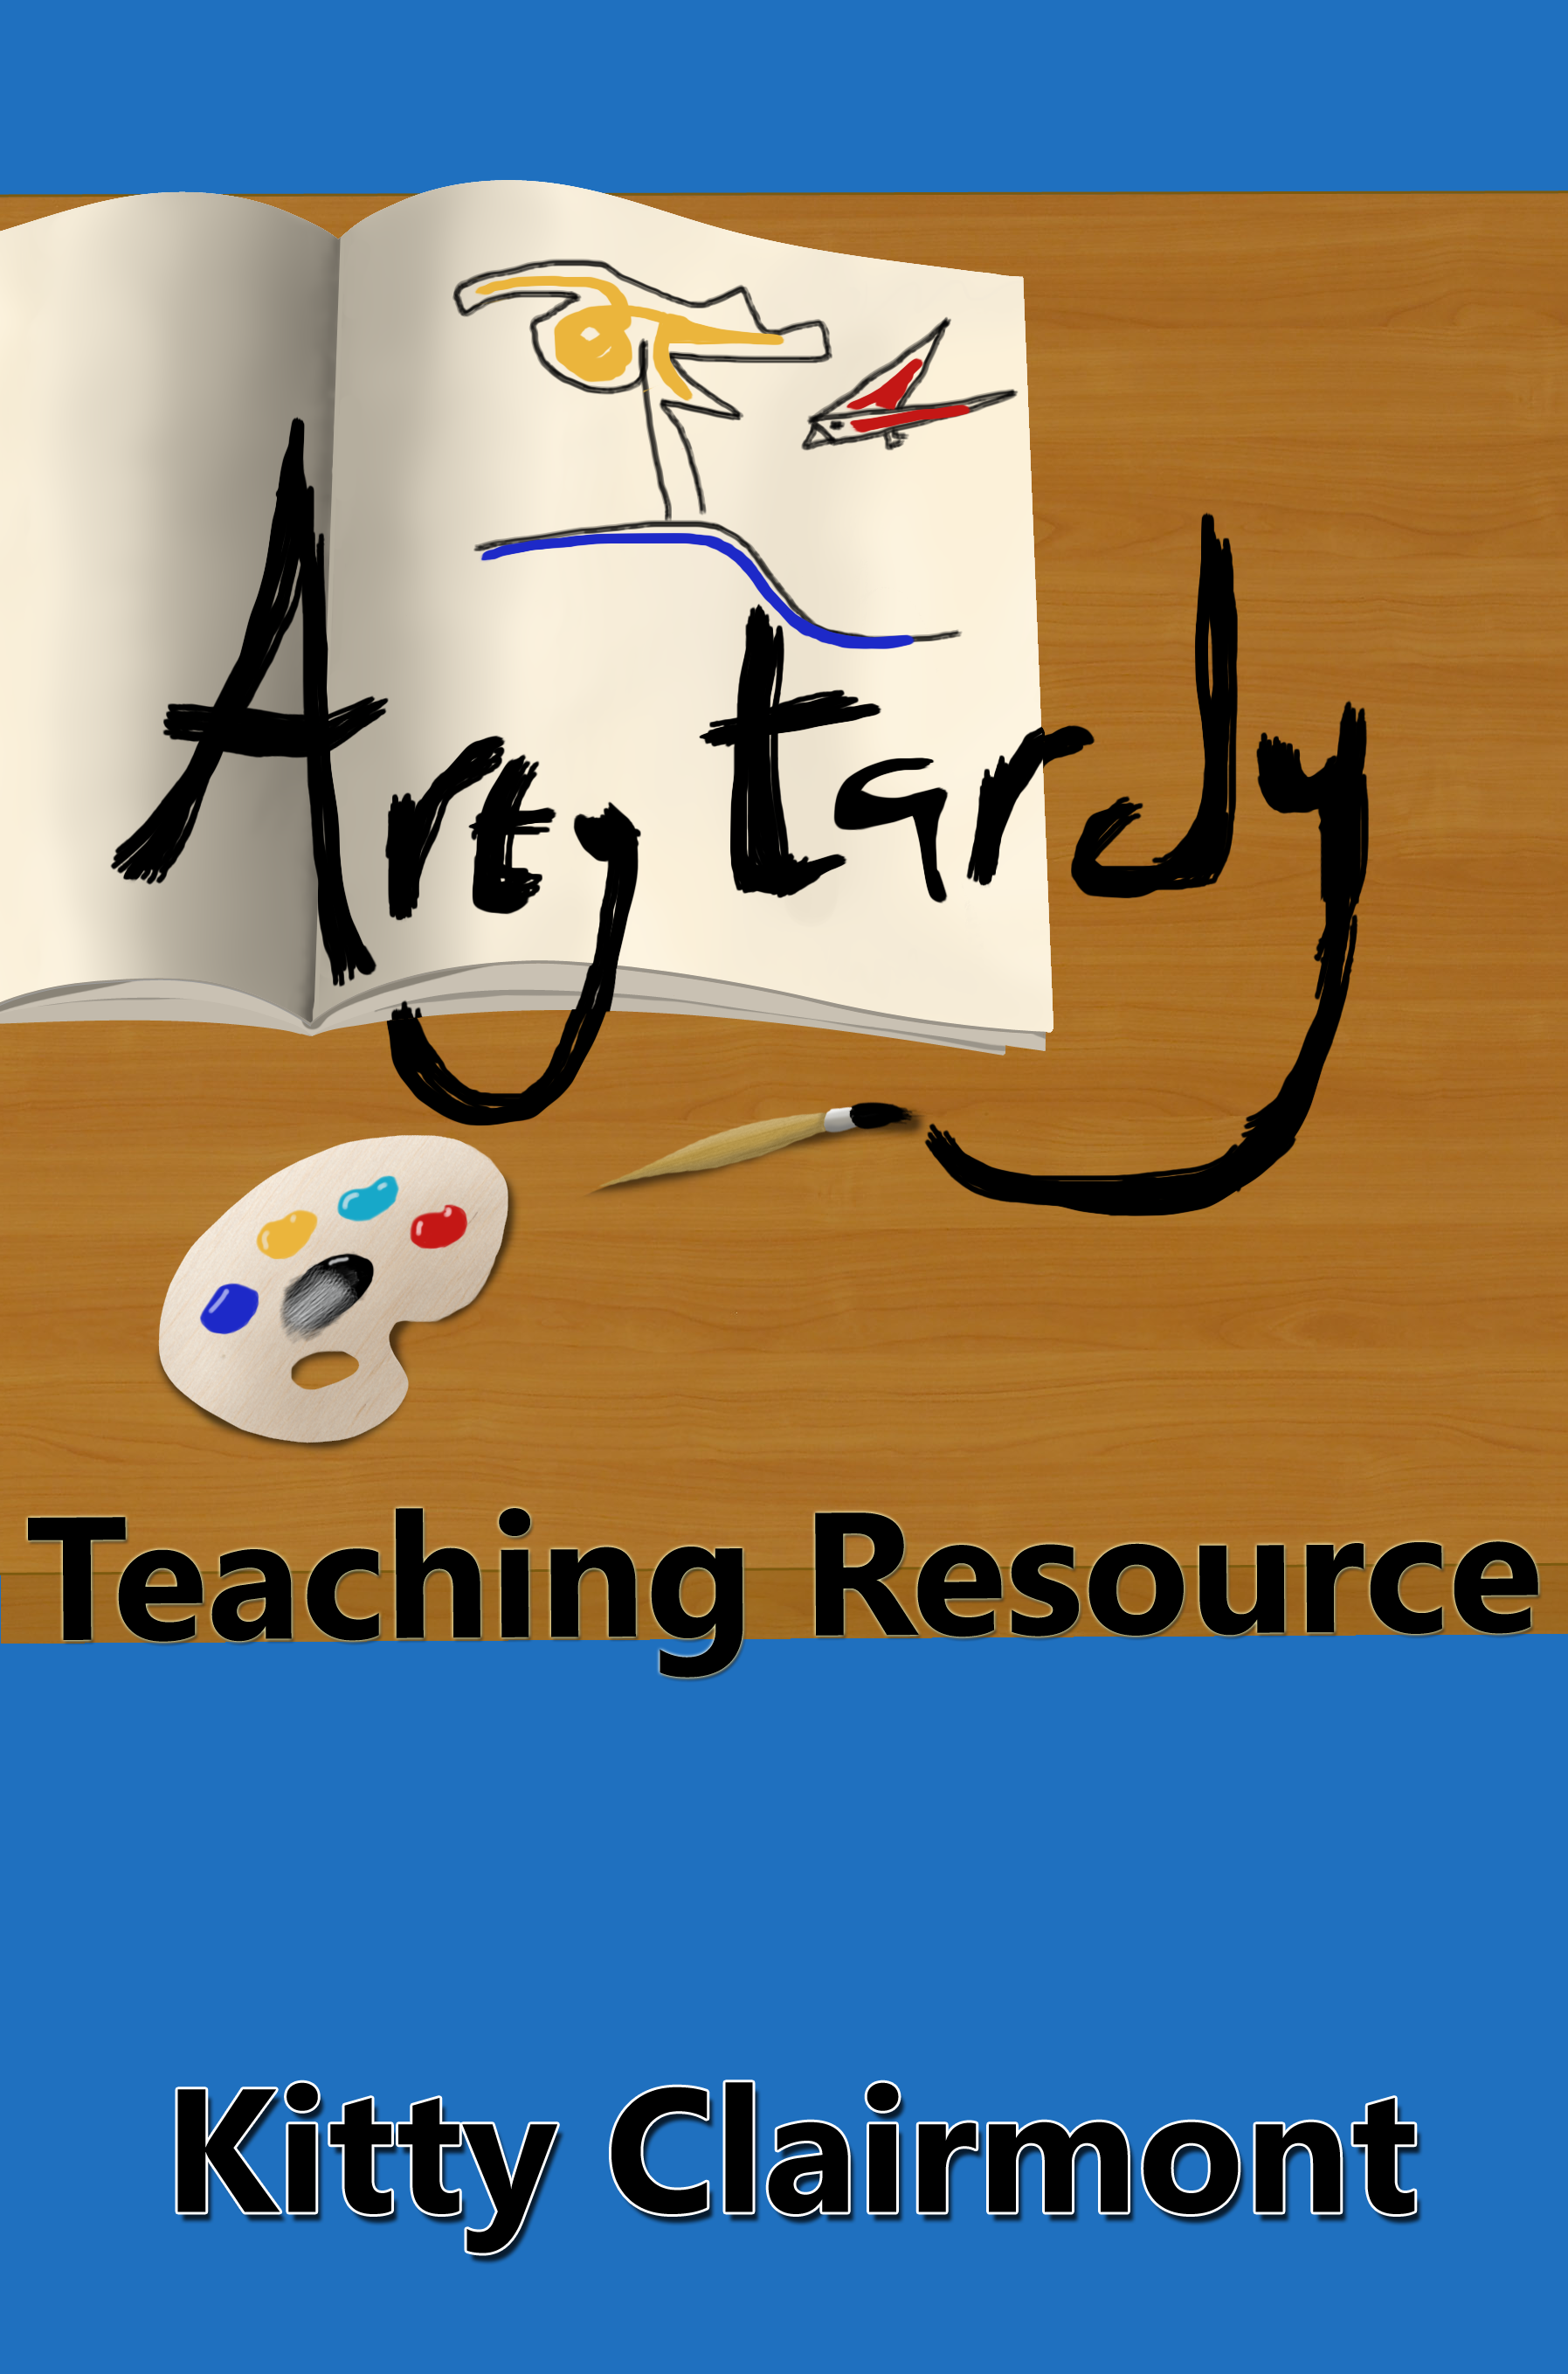 Teaching Resource cover.png